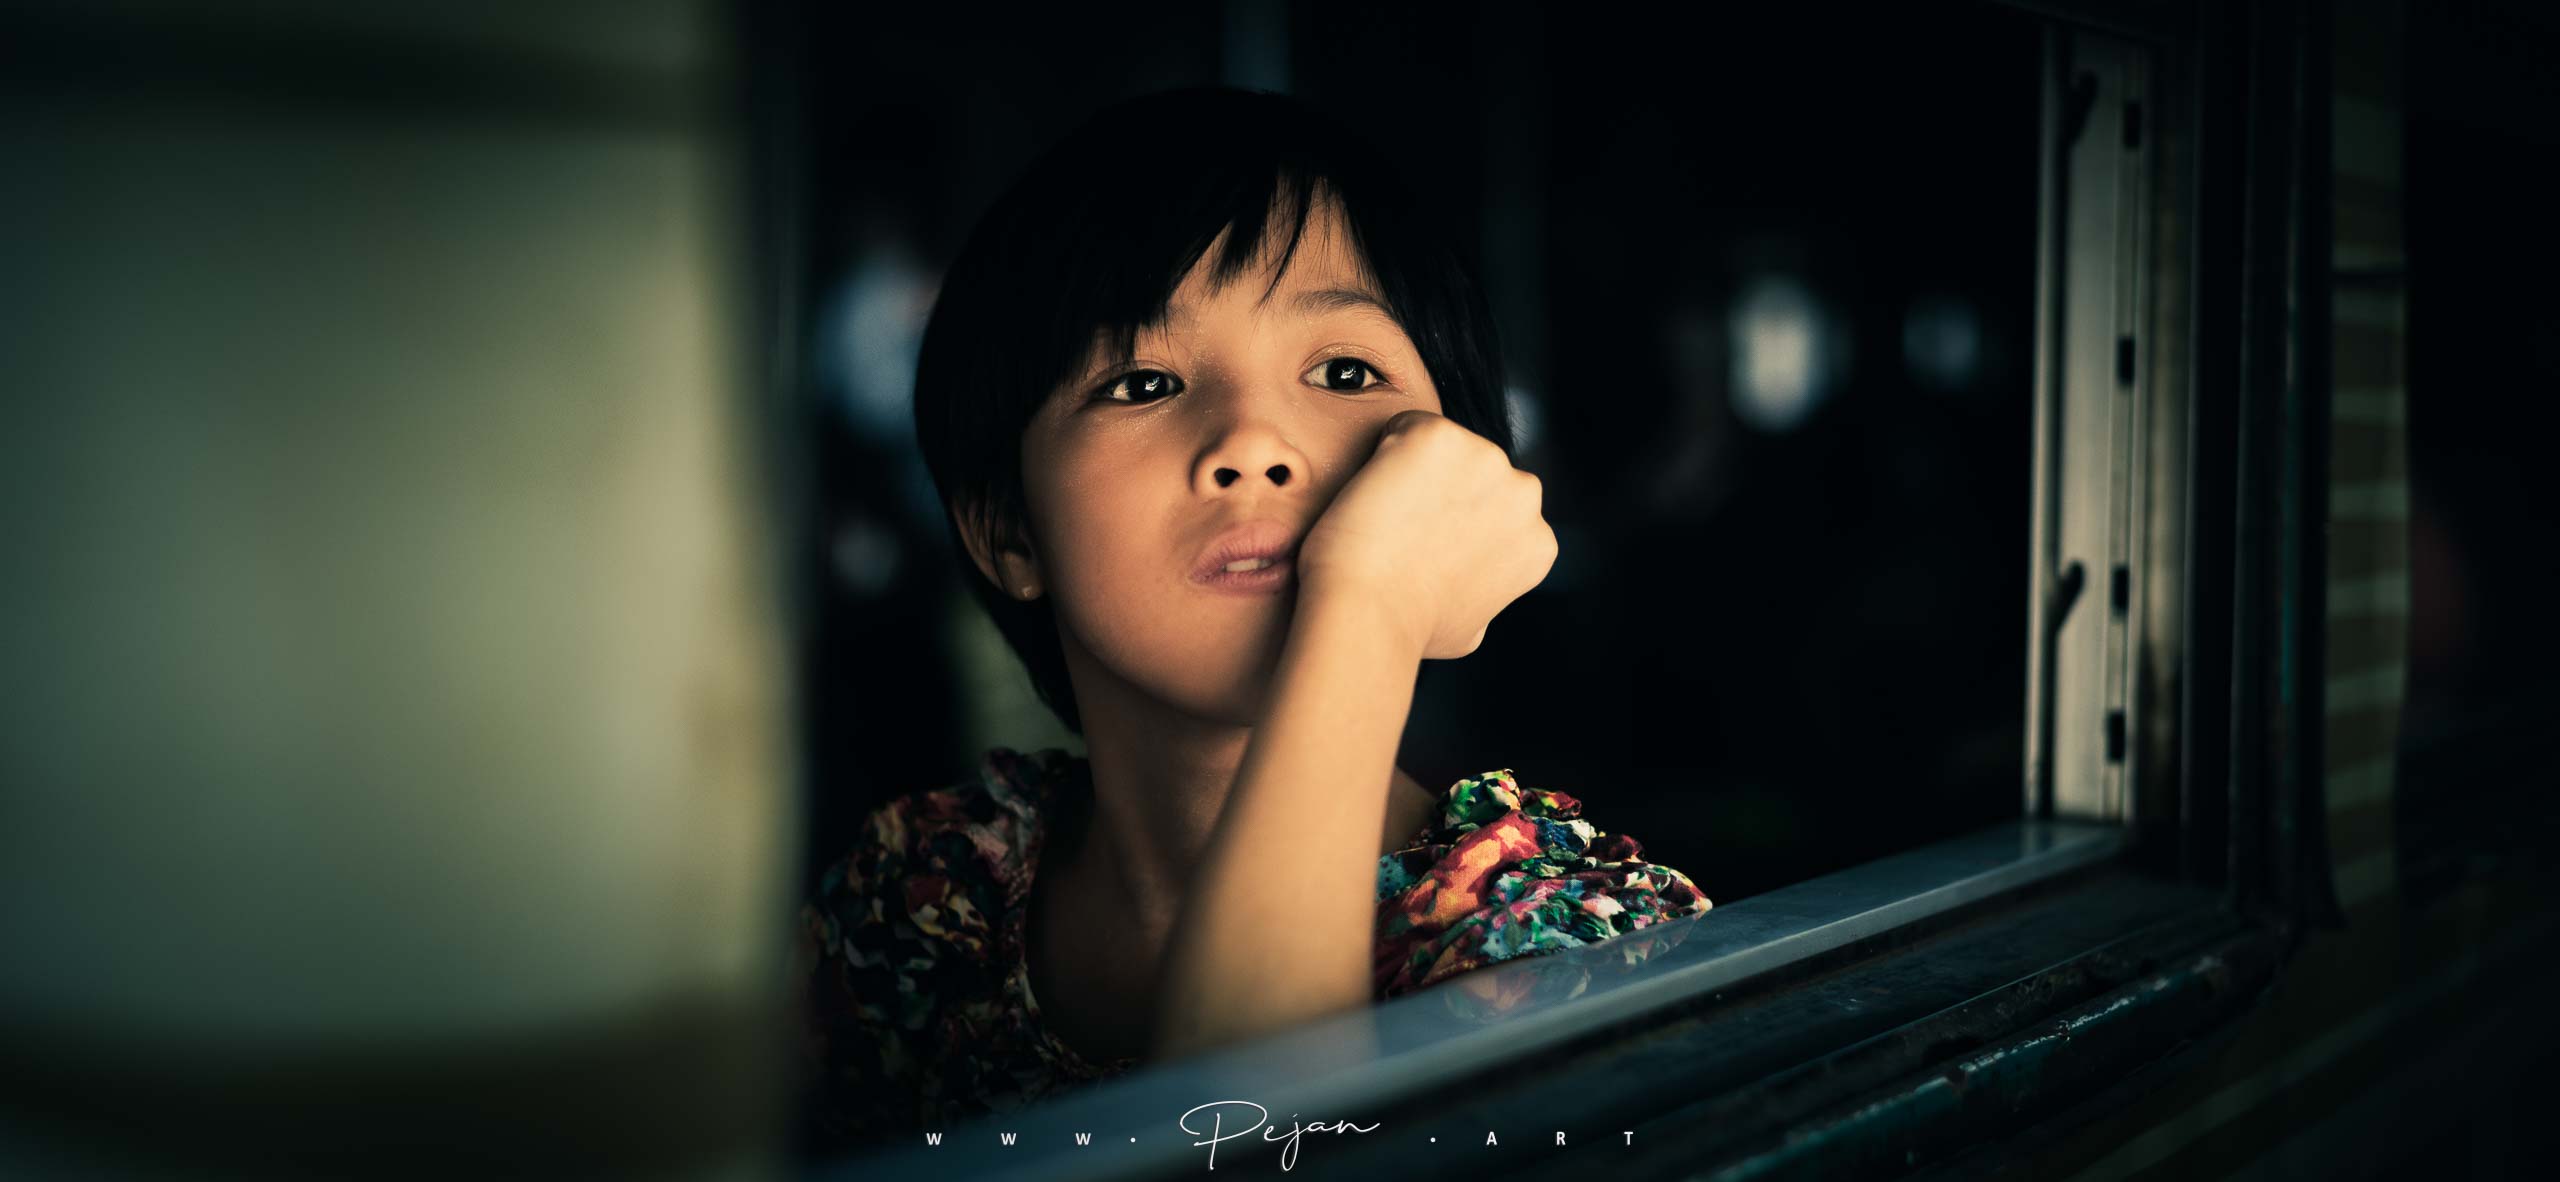 Portrait of a young girl looking out of a train window in Yangoon, Myanmar, Southeast Asia. She seems to be lost in thought.